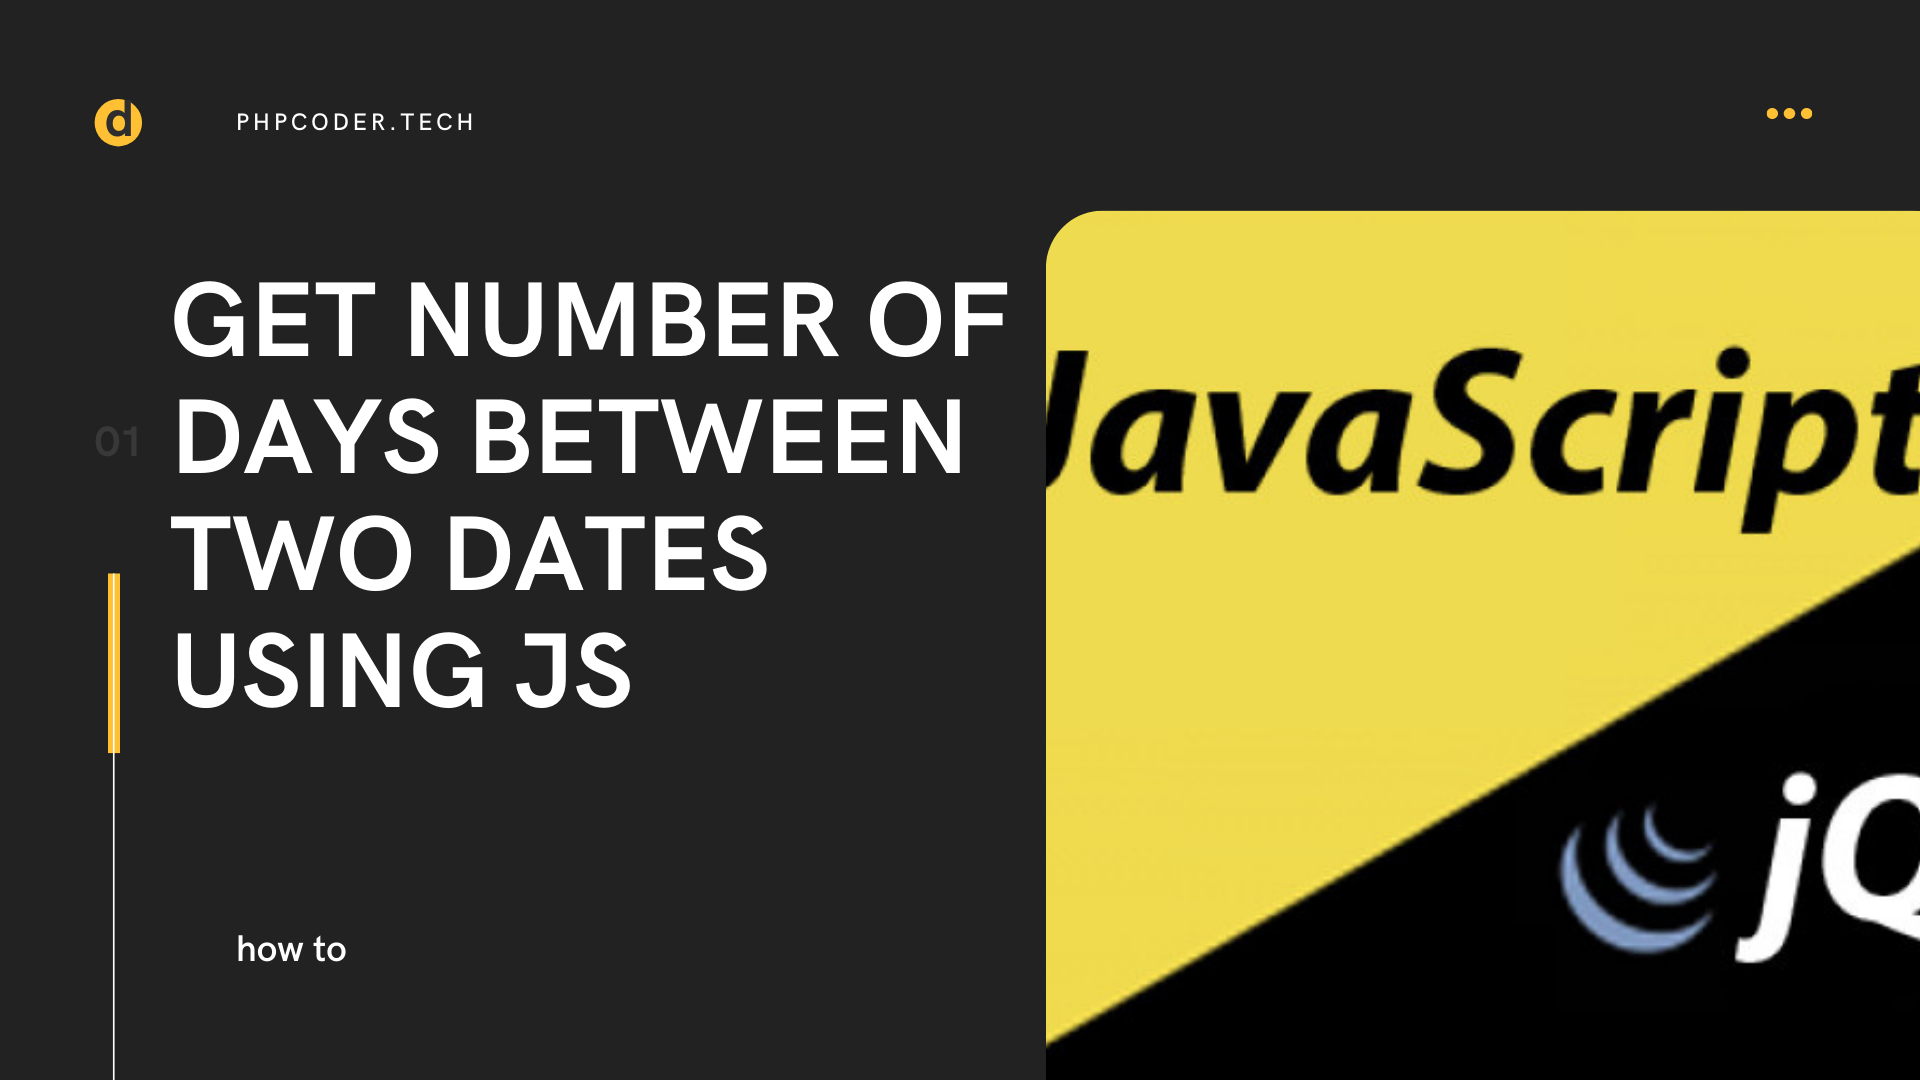 Get Number of Days between Two Dates Using JS